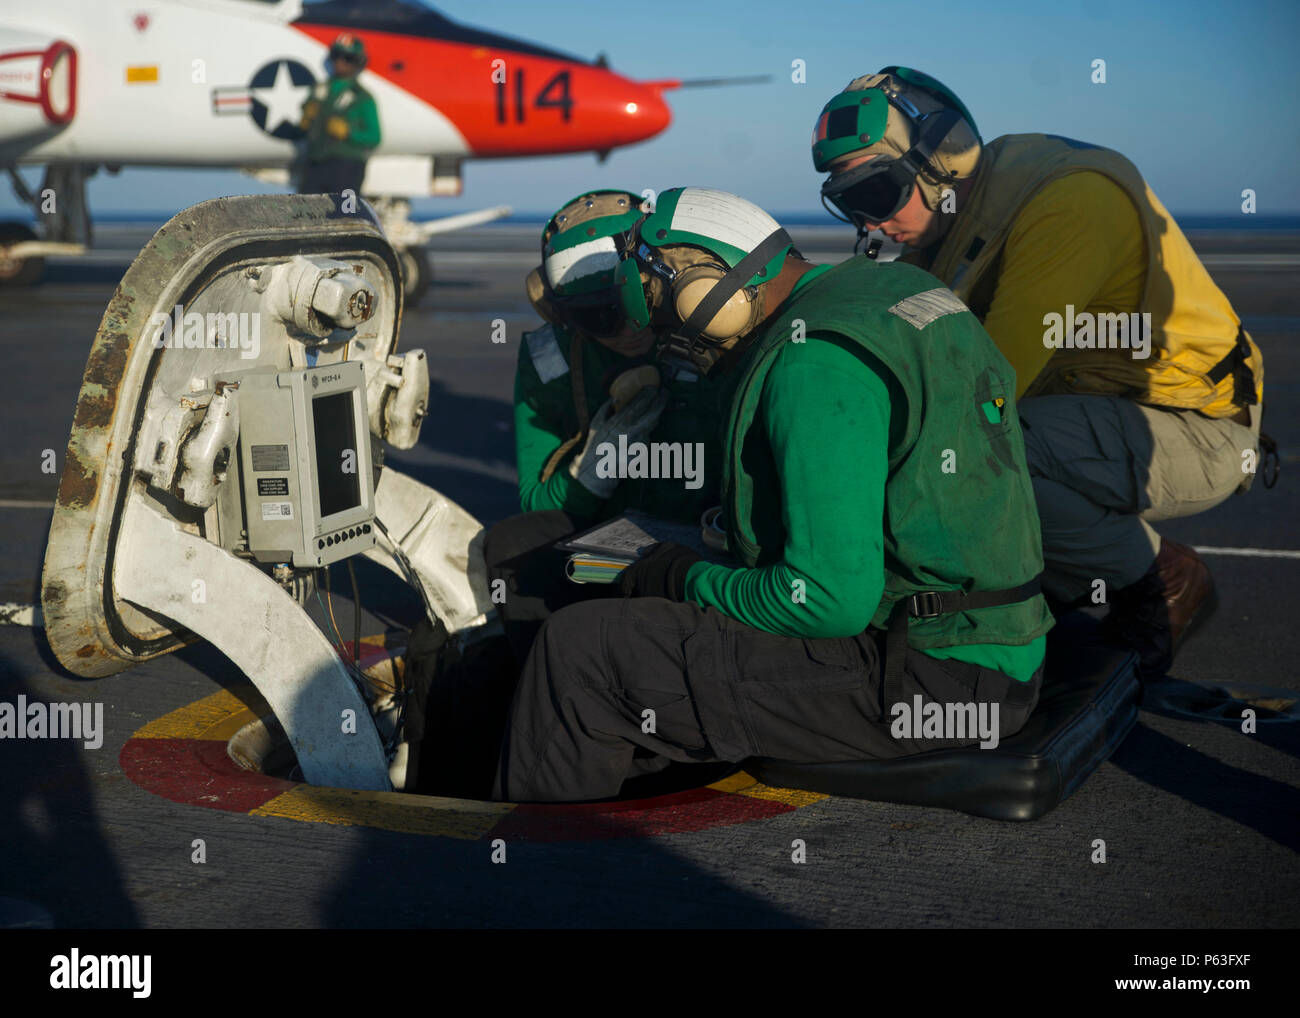 160424-VH385-N-050 ATLANTIC OCEAN (April 24, 2016) – A group of Sailors prepare for flight operations on the flight deck of the aircraft carrier USS George Washington (CVN 73). Washington, homeported in Norfolk, is underway conducting carrier qualifications in the Atlantic Ocean. (U.S. Navy photo by Mass Communication Specialist 3rd Class Wyatt L. Anthony/Released) Stock Photo